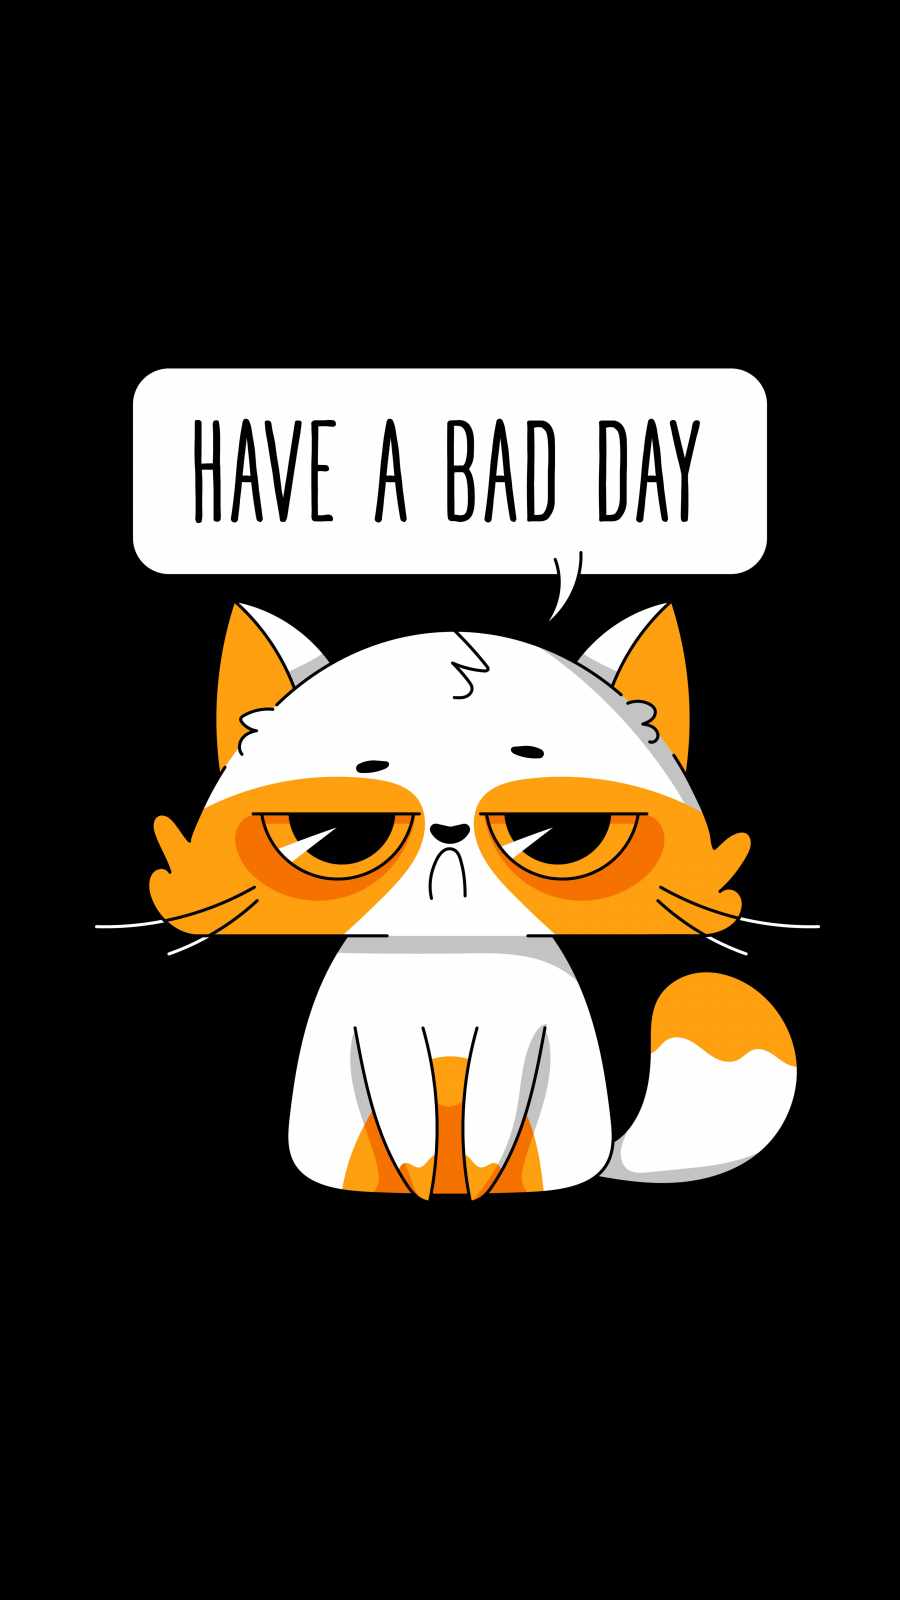 Have a Bad Day iPhone Wallpaper